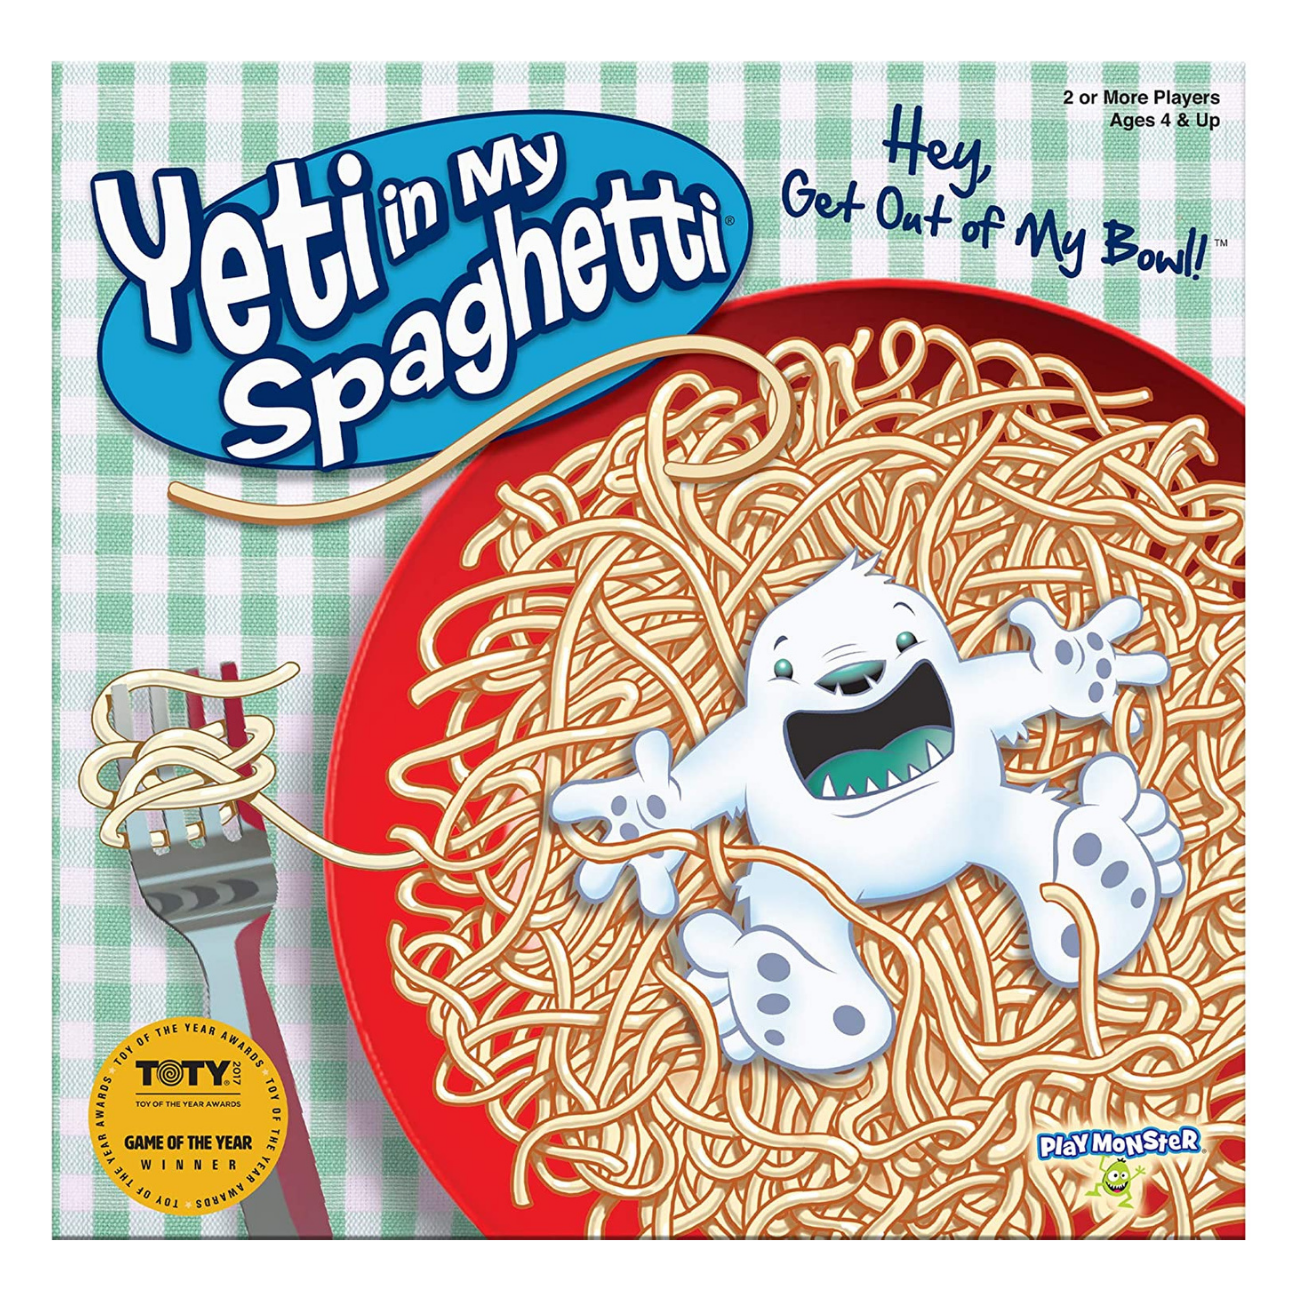 Yeti In My Spaghetti {Review} - Adventures In Websterland